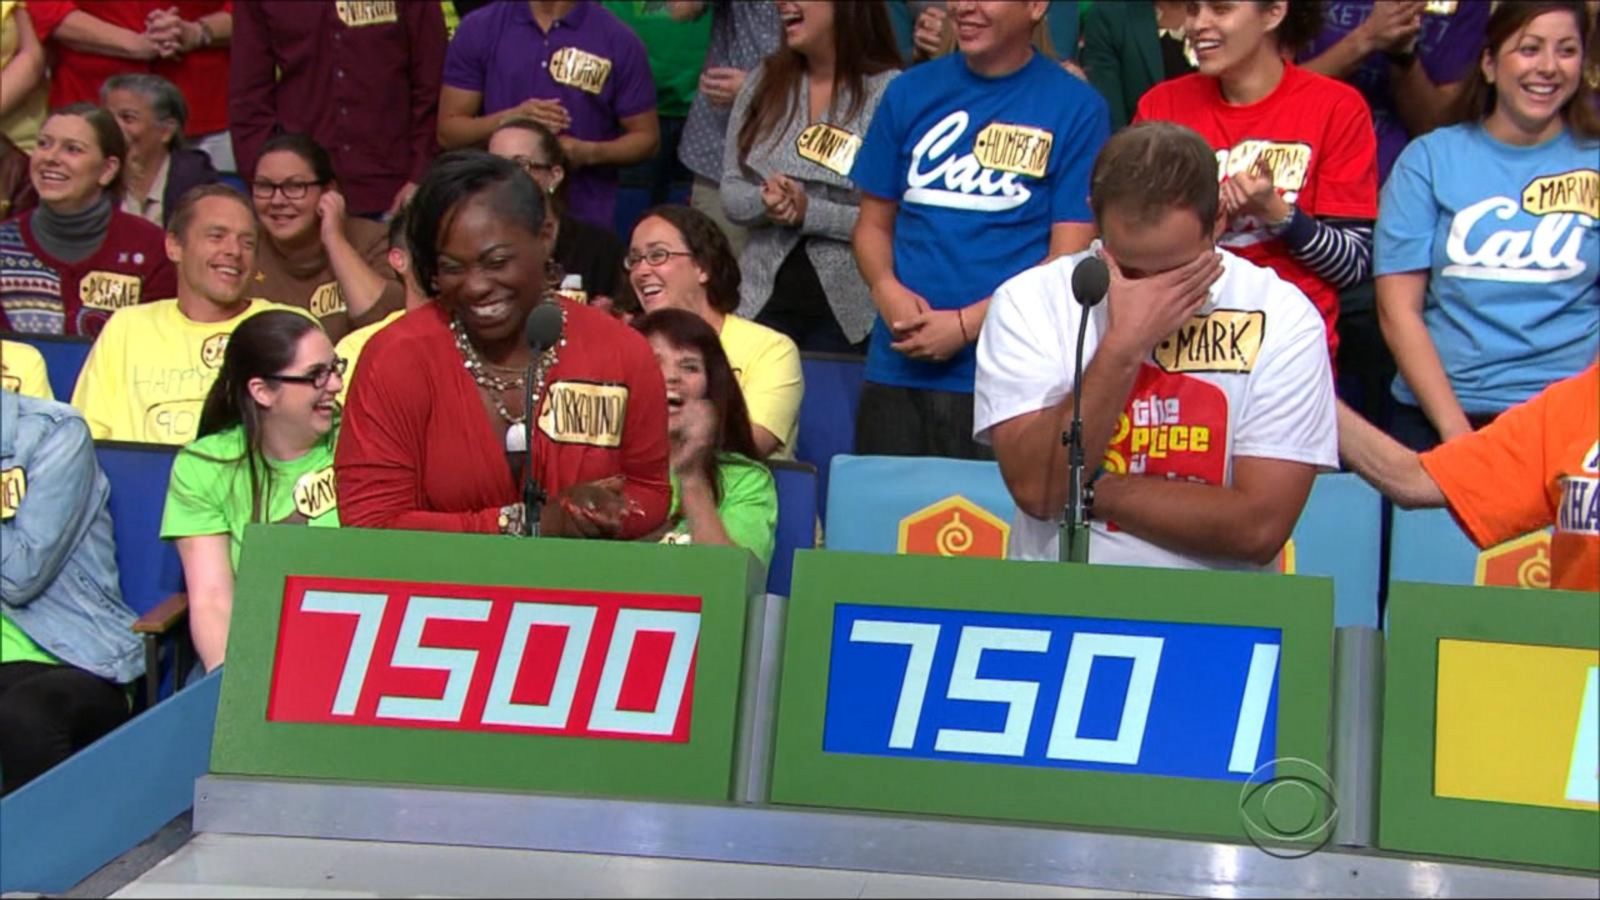 iPhone's Value Grossly Overestimated on 'The Price is Right' - Good ...